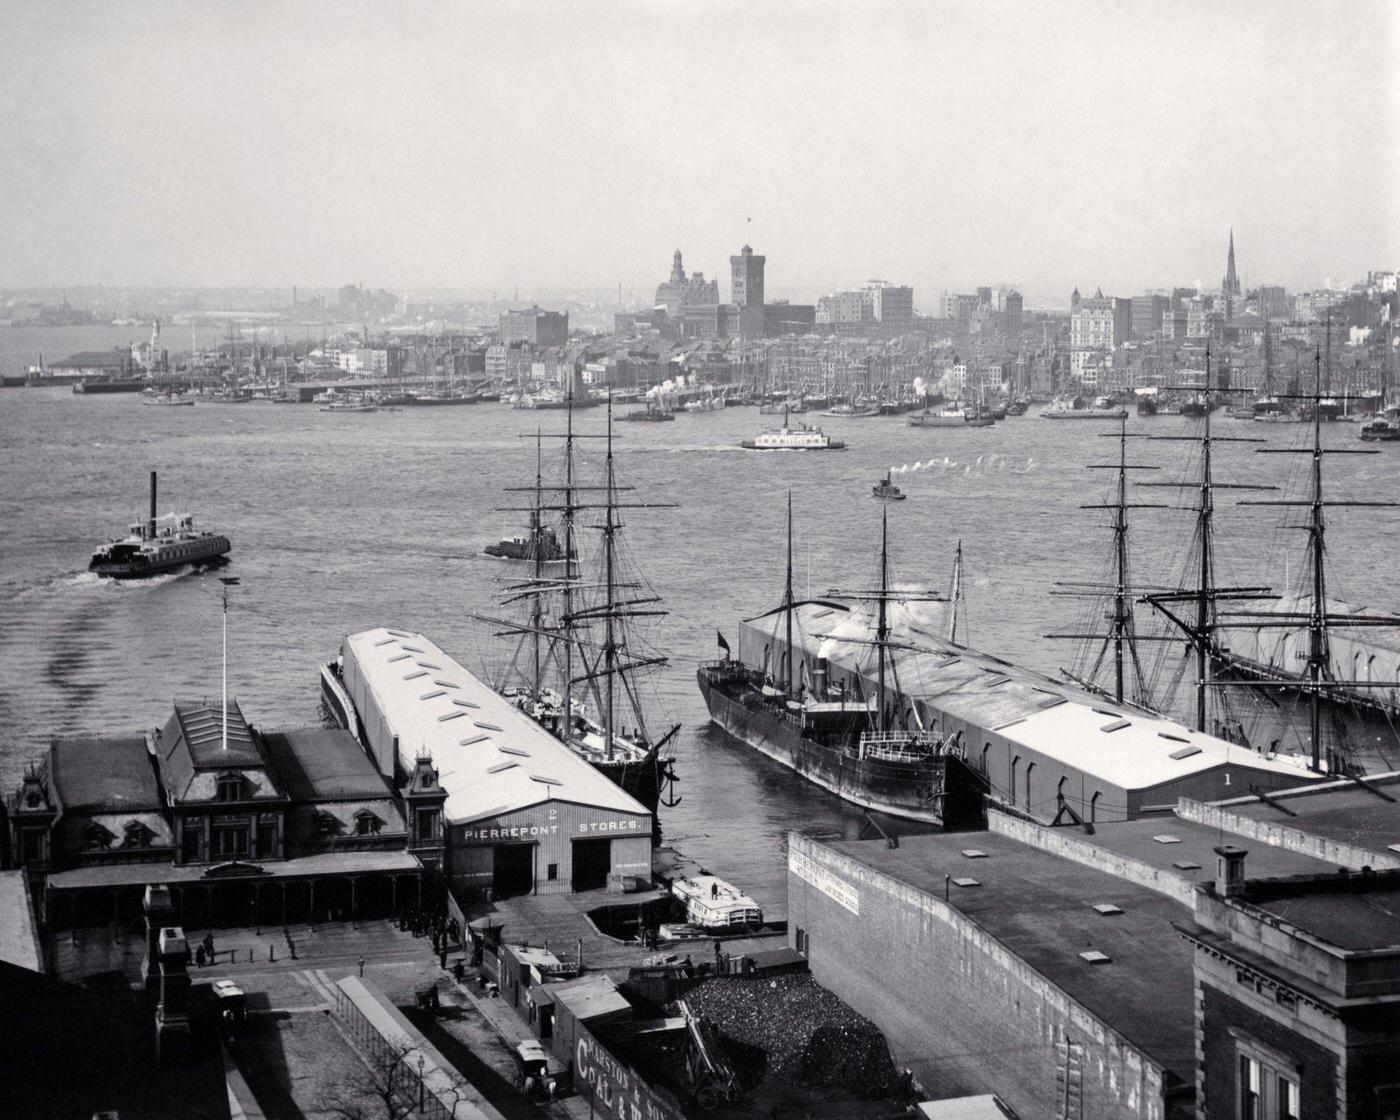 Downtown Manhattan Seen From Brooklyn Docks, East River Flowing Into New York Harbor, New York City, 1880